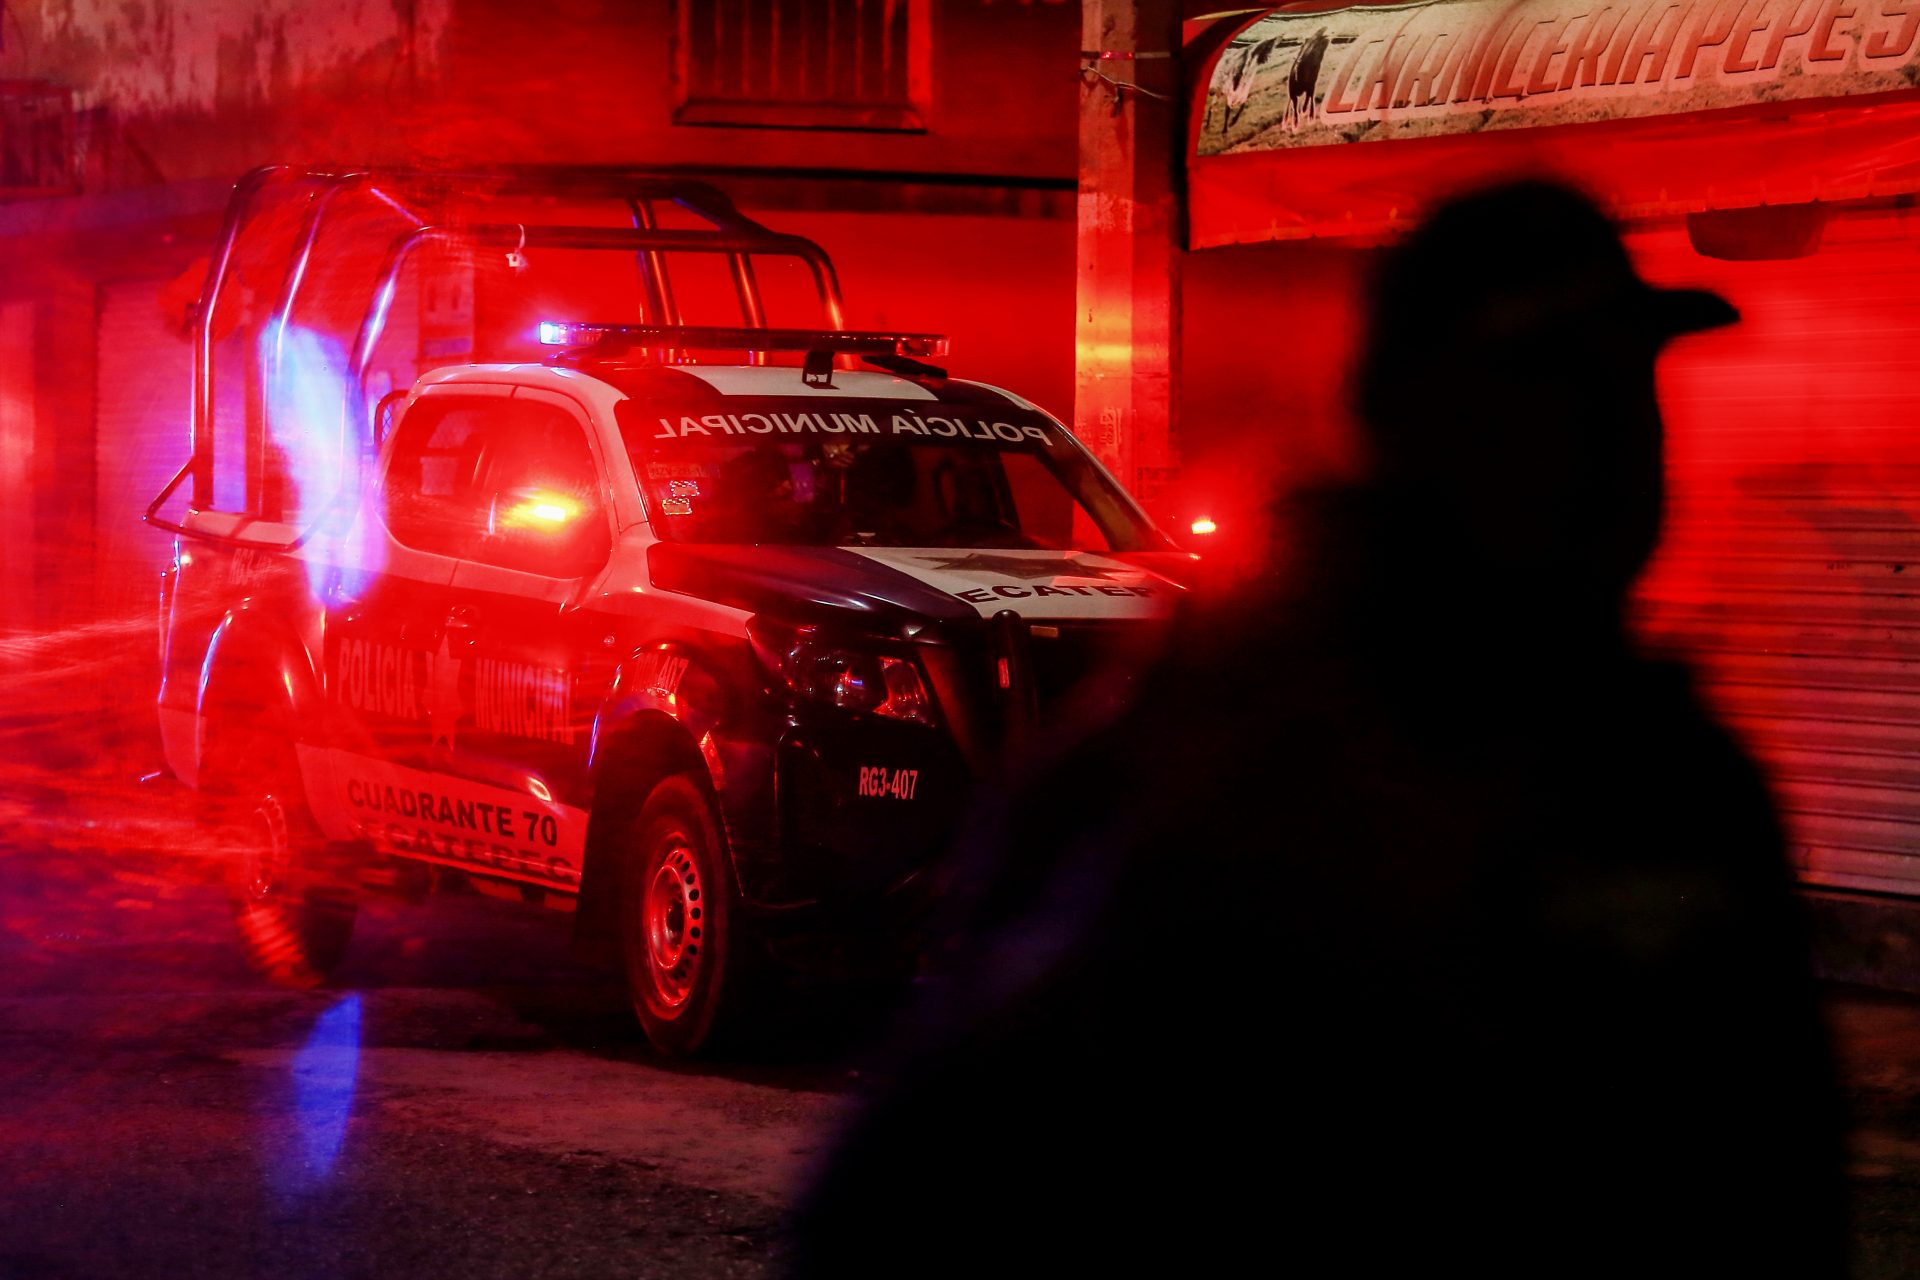 Mexico faces its deadliest elections ever as 24 local candidates are killed